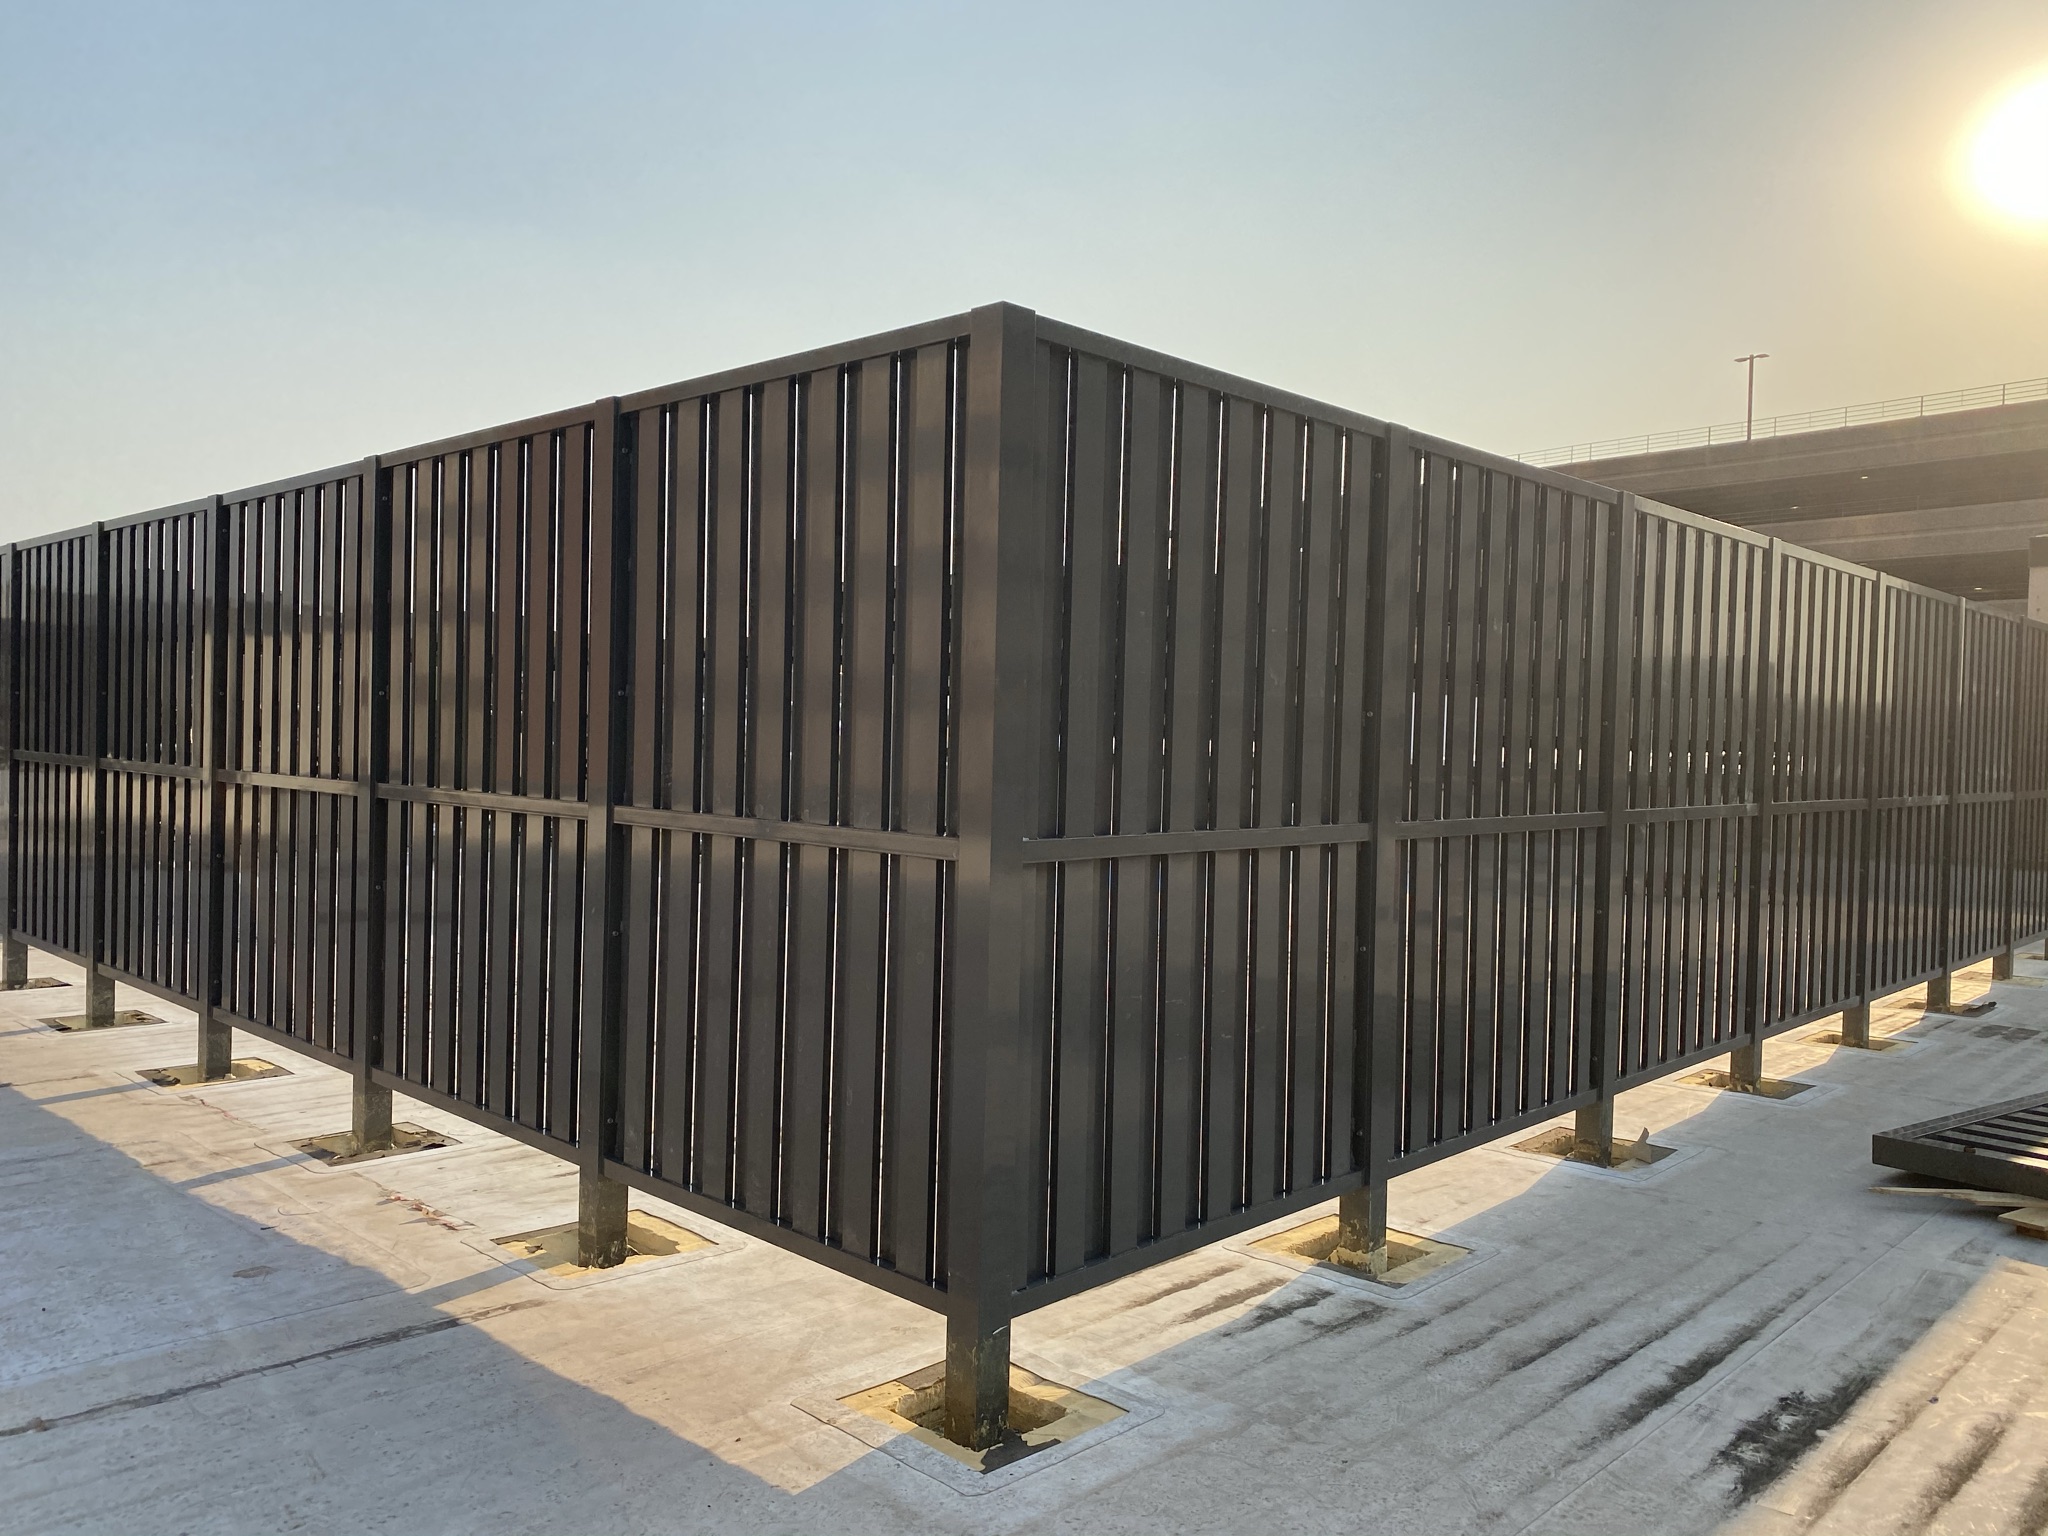 Alternating rooftop screen fencing providing a formidable appearance with large tubular louvers running vertically or horizontally in a shadow box pattern.